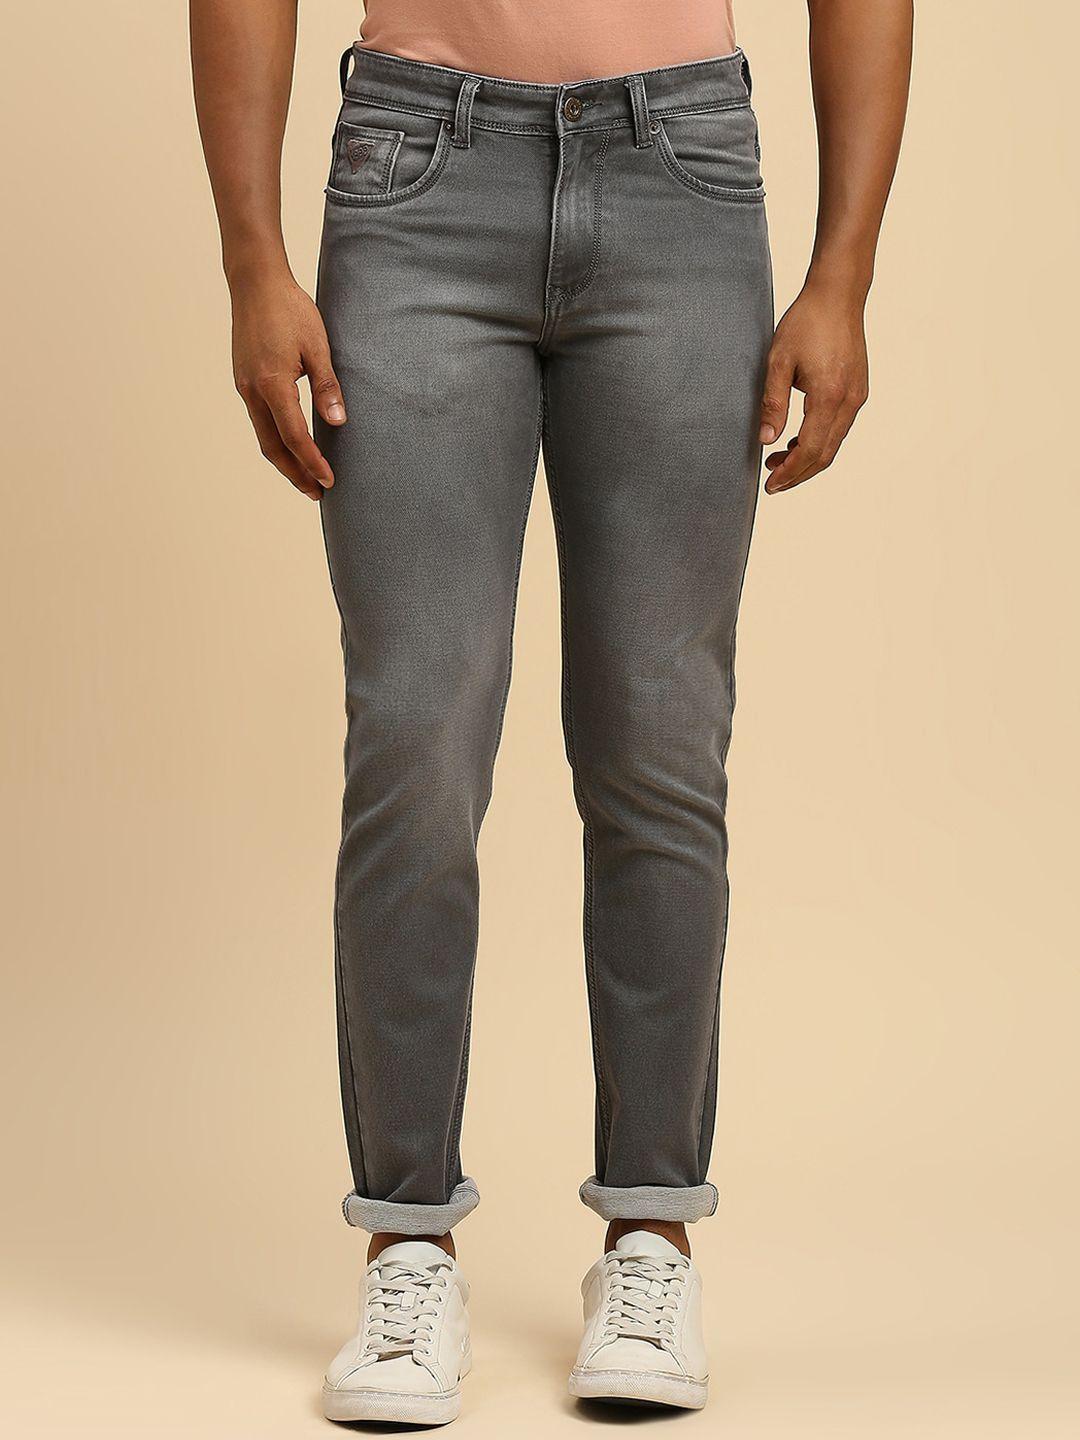 hj-hasasi-men-slim-fit-clean-look-light-fade-pure-cotton-jeans